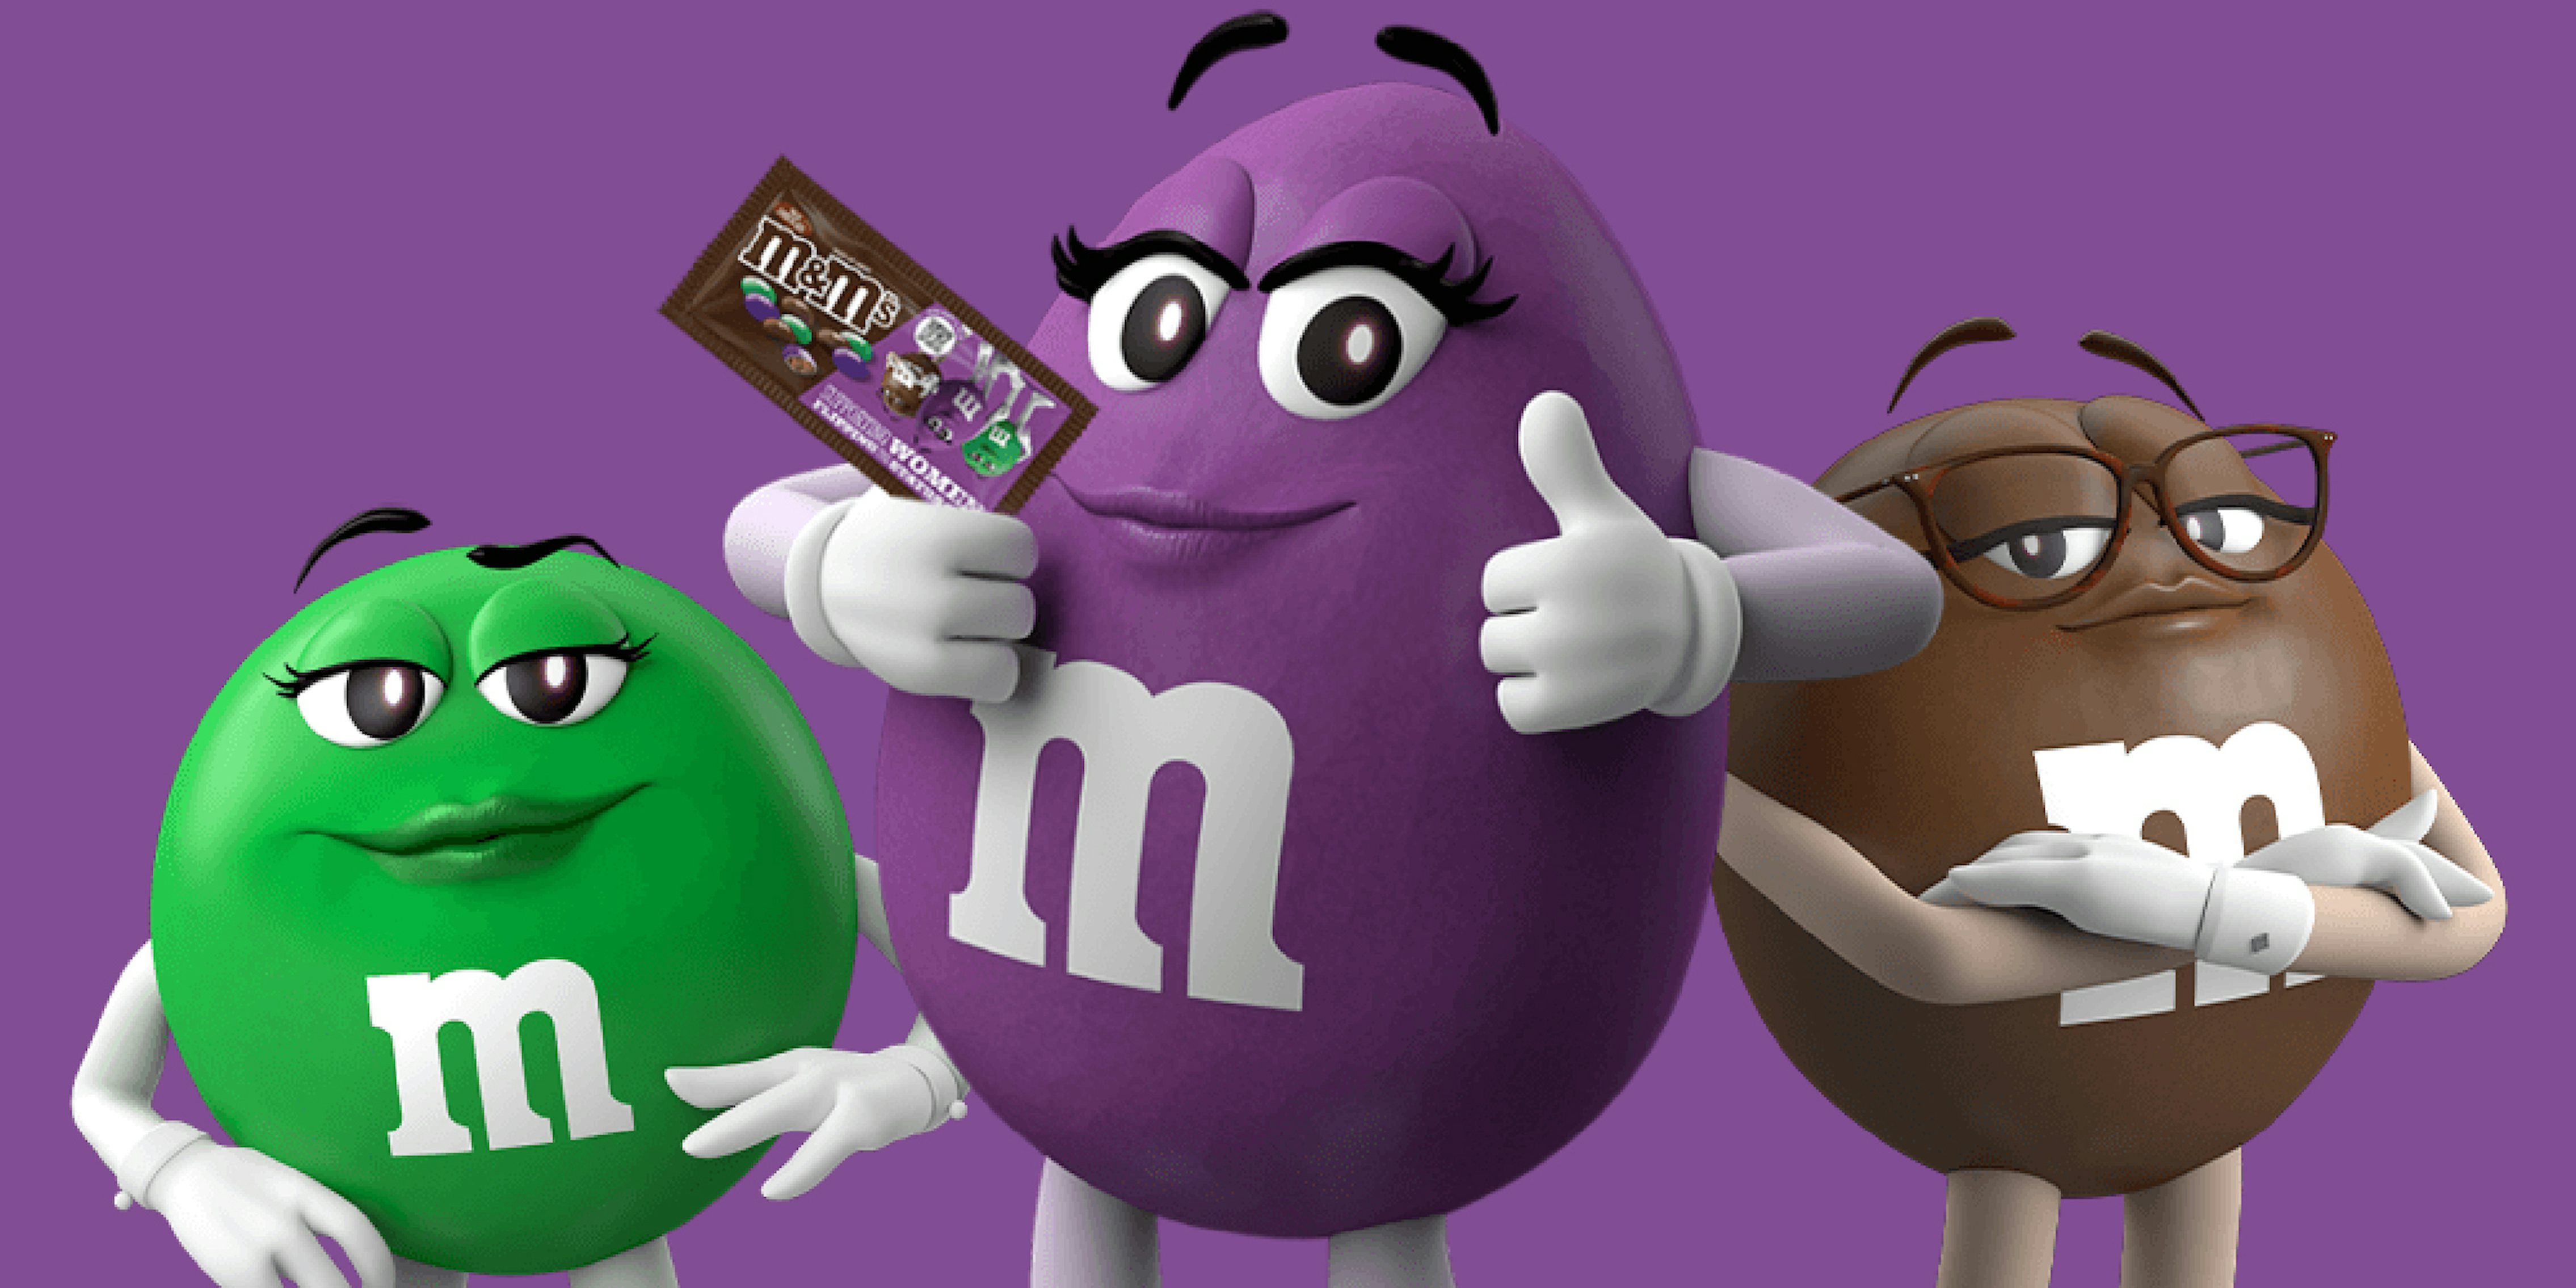 green, purple, and brown m&m's